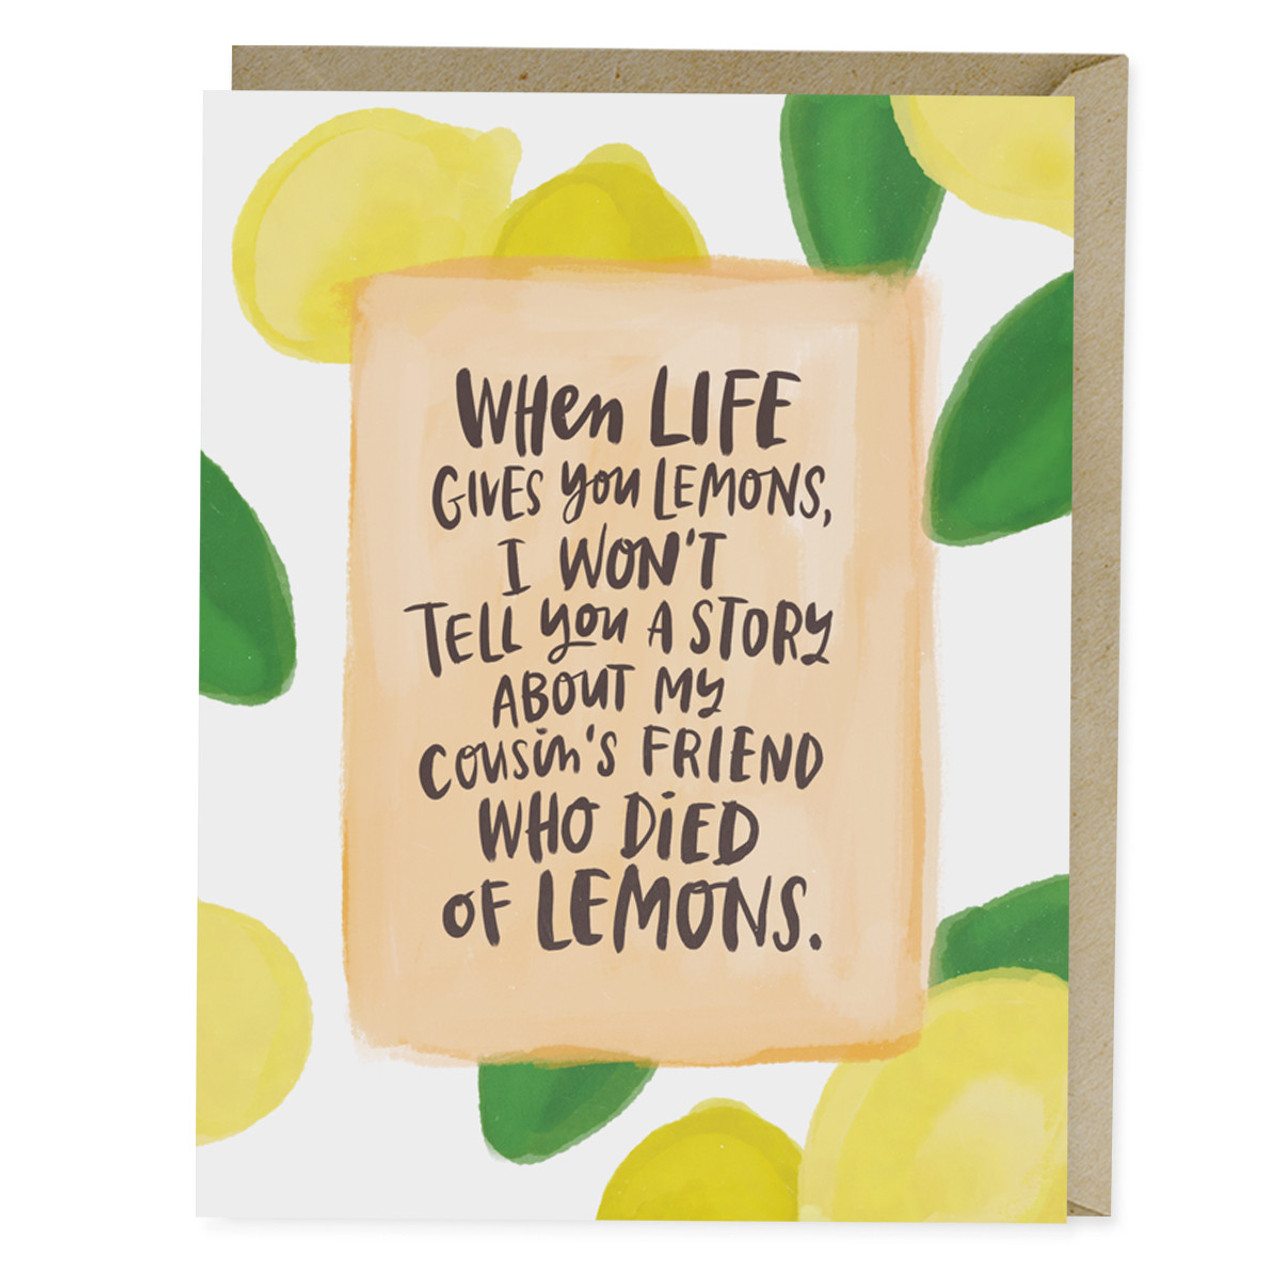 Died of Lemons Empathy Card by Emily McDowell